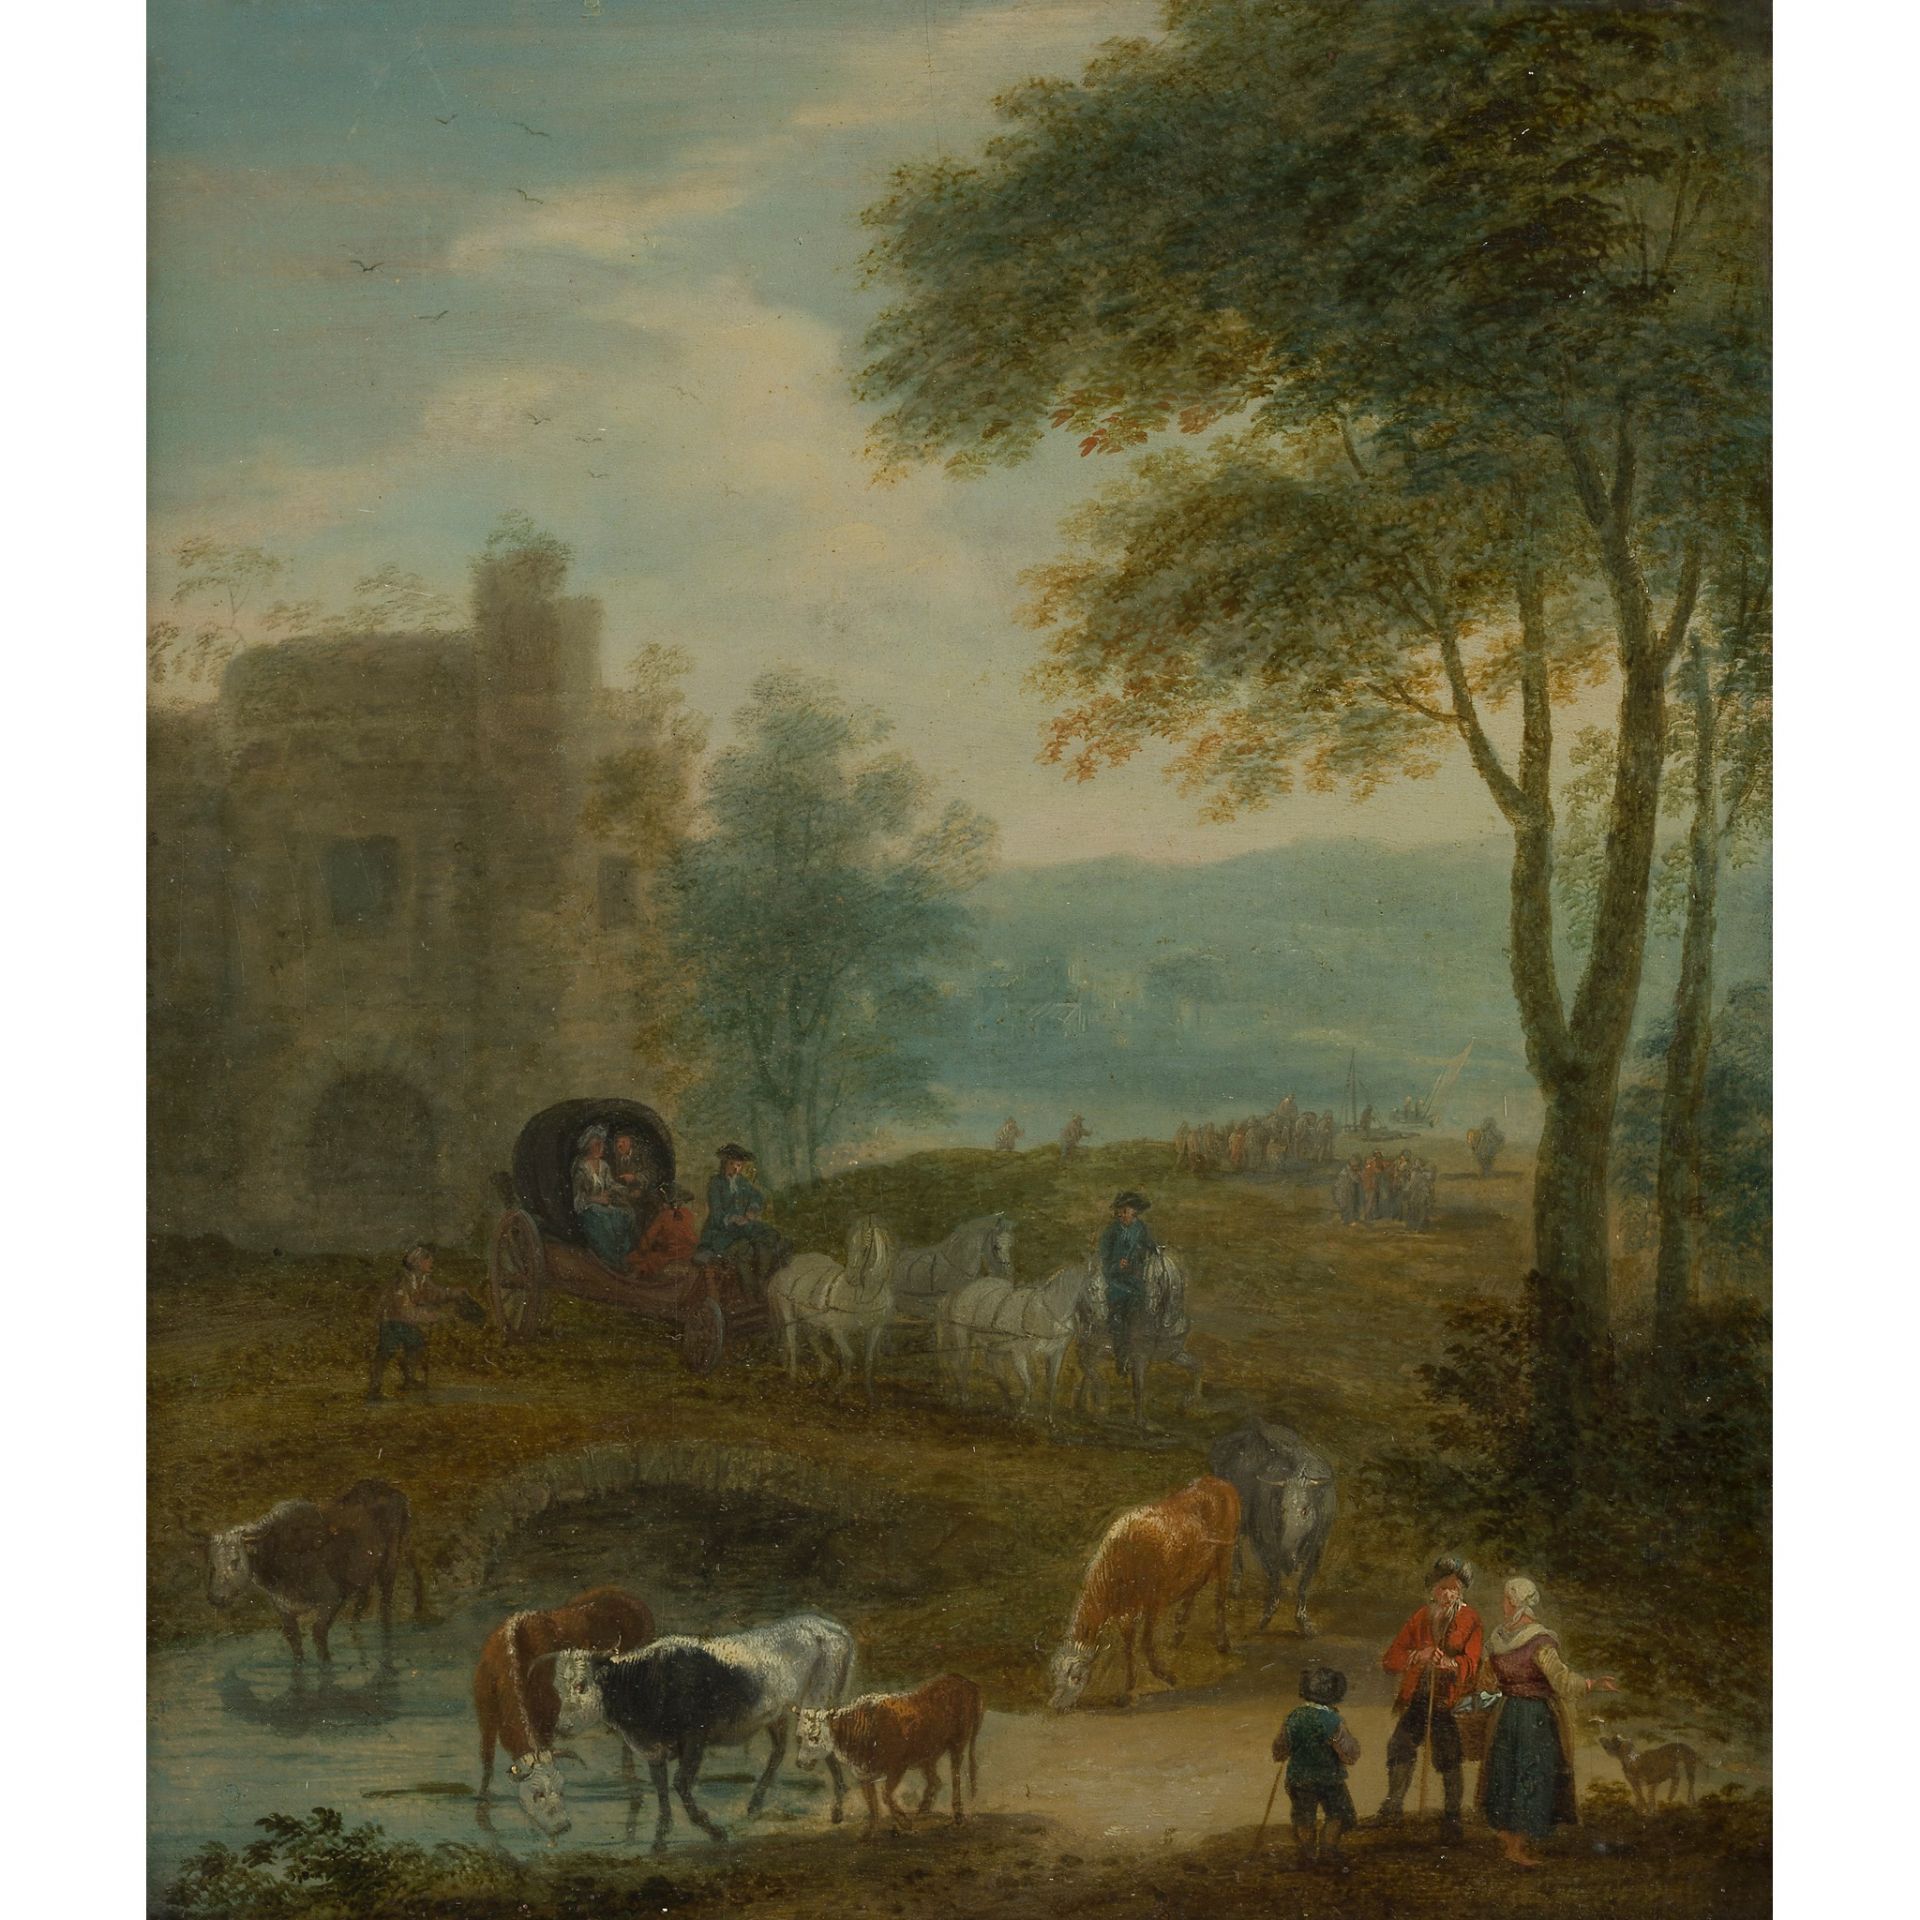 ATTRIBUTED TO MATHYS SCHOEVAERDTS A WOODED RIVER LANDSCAPE WITH TRAVELLERS AND ANIMALS